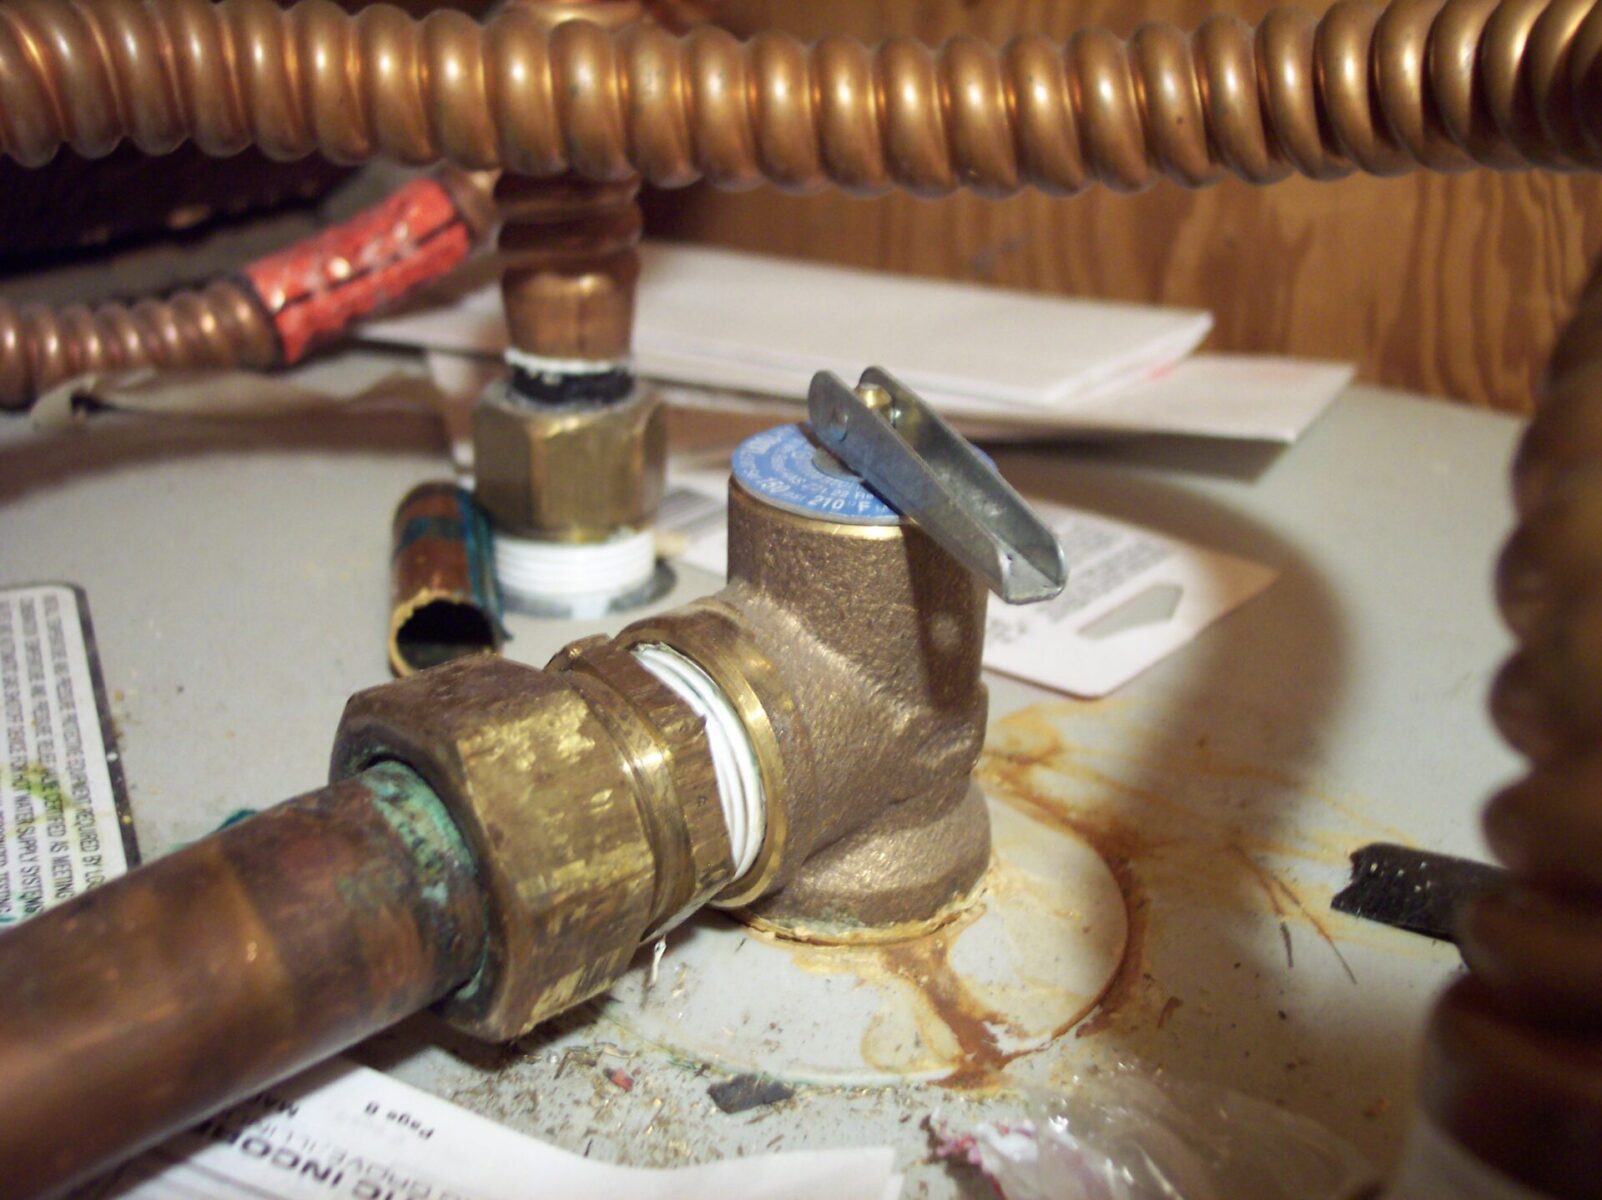 How to locate the emergency shut-off valve